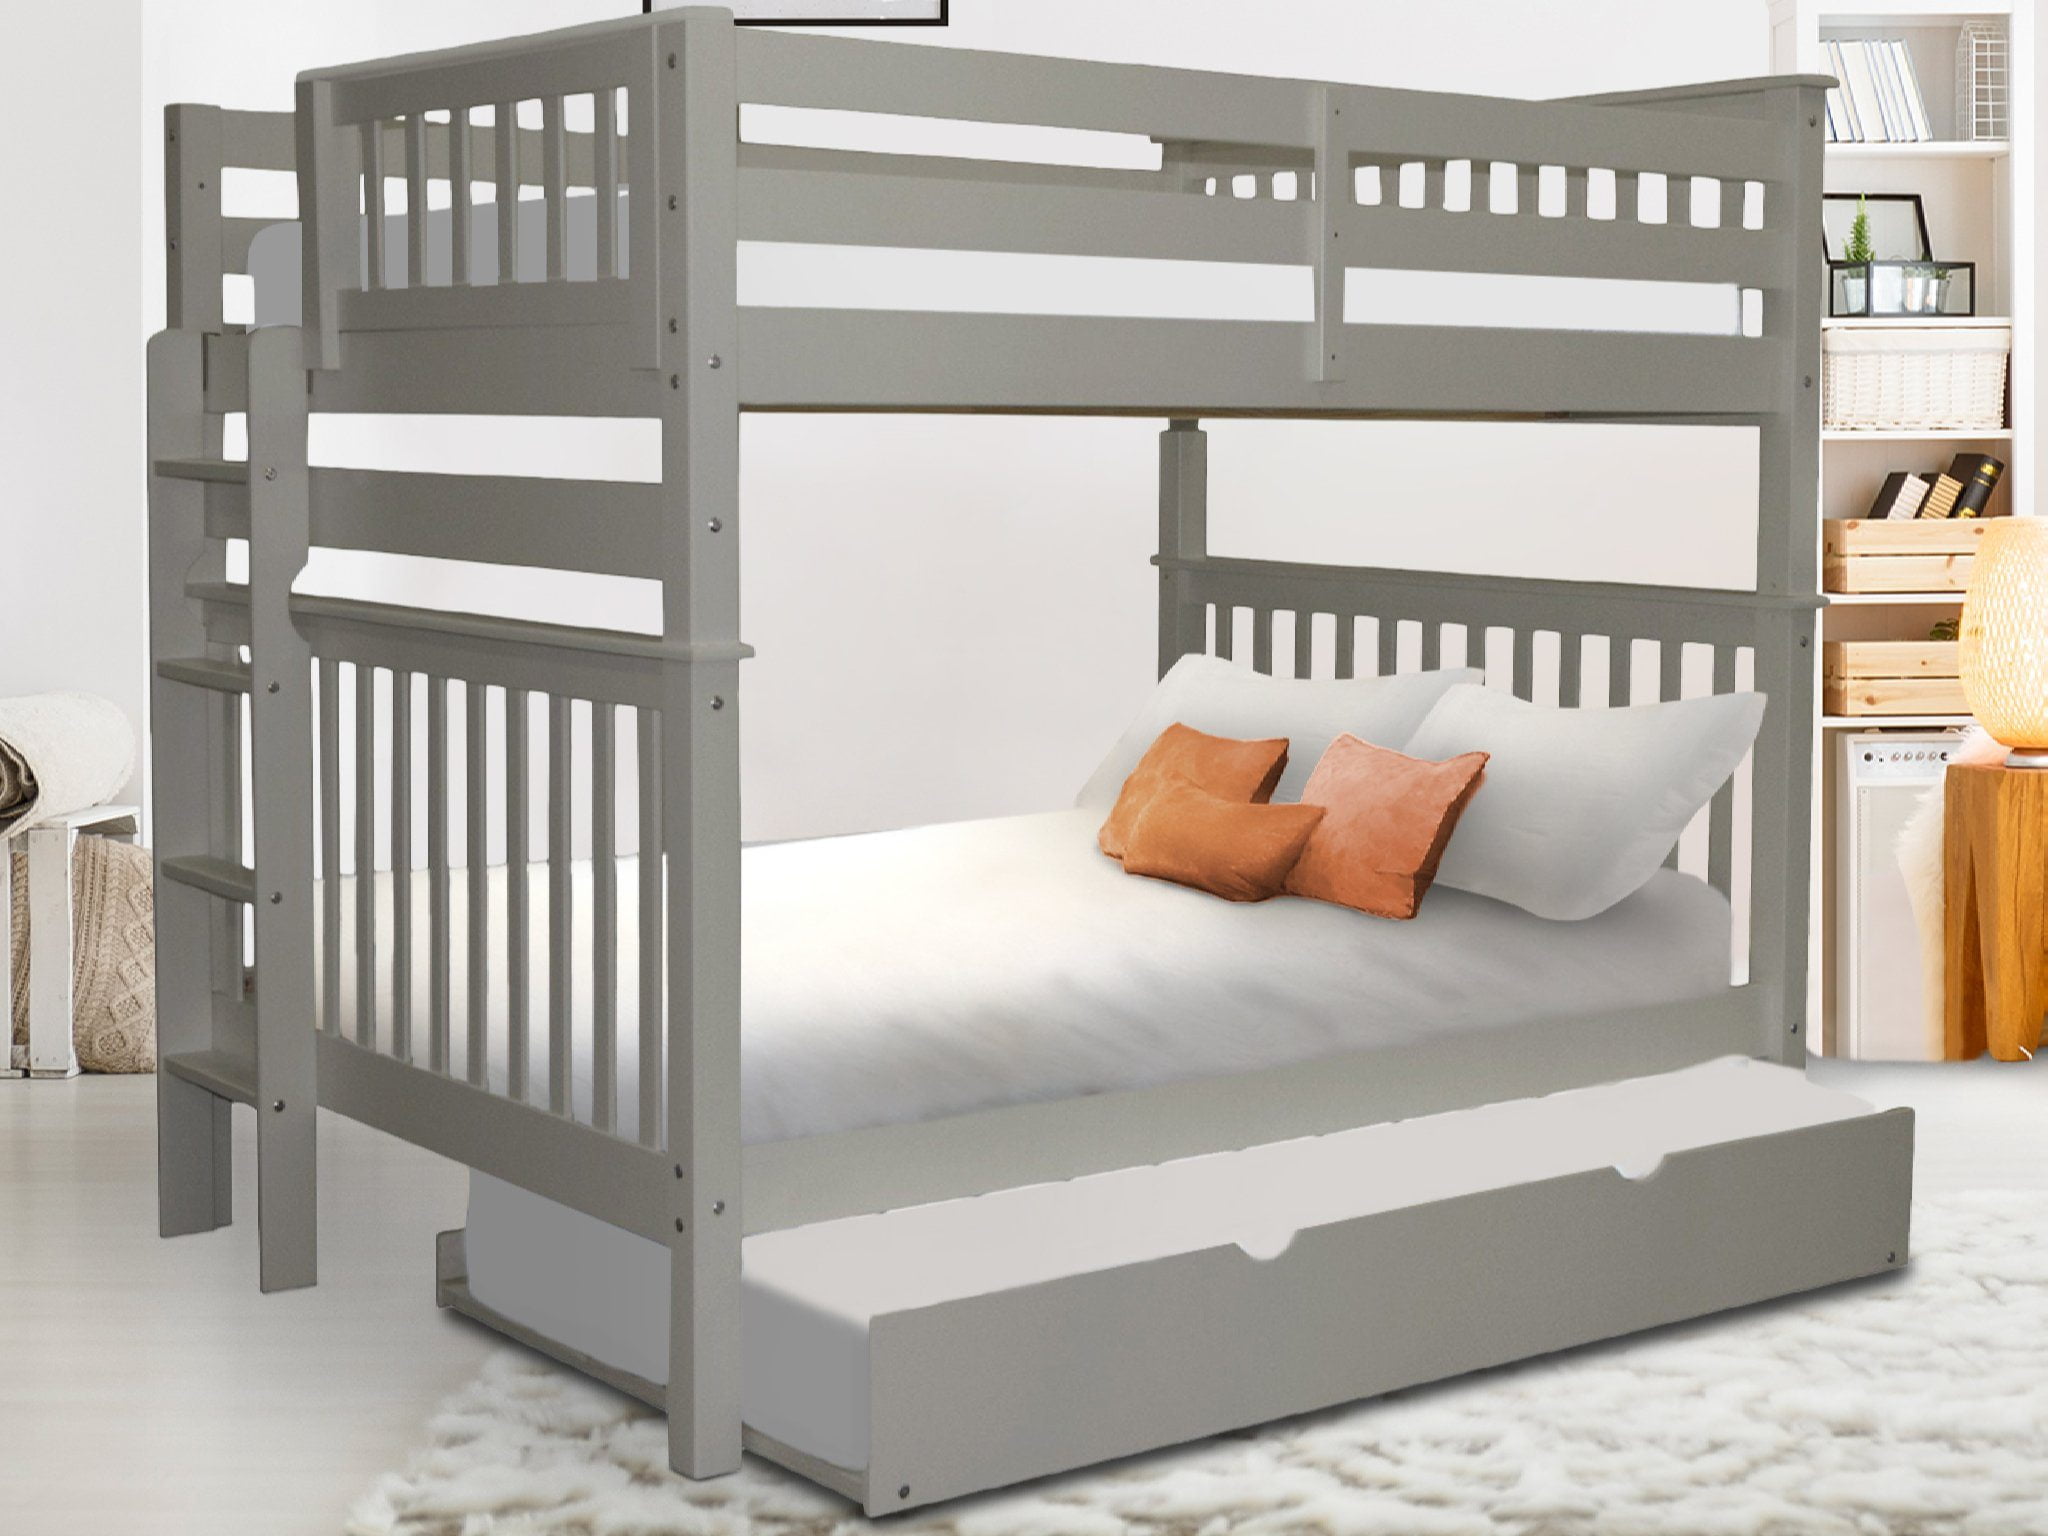 Bunk Beds Full Over Mission Style, Mission Style Bunk Beds